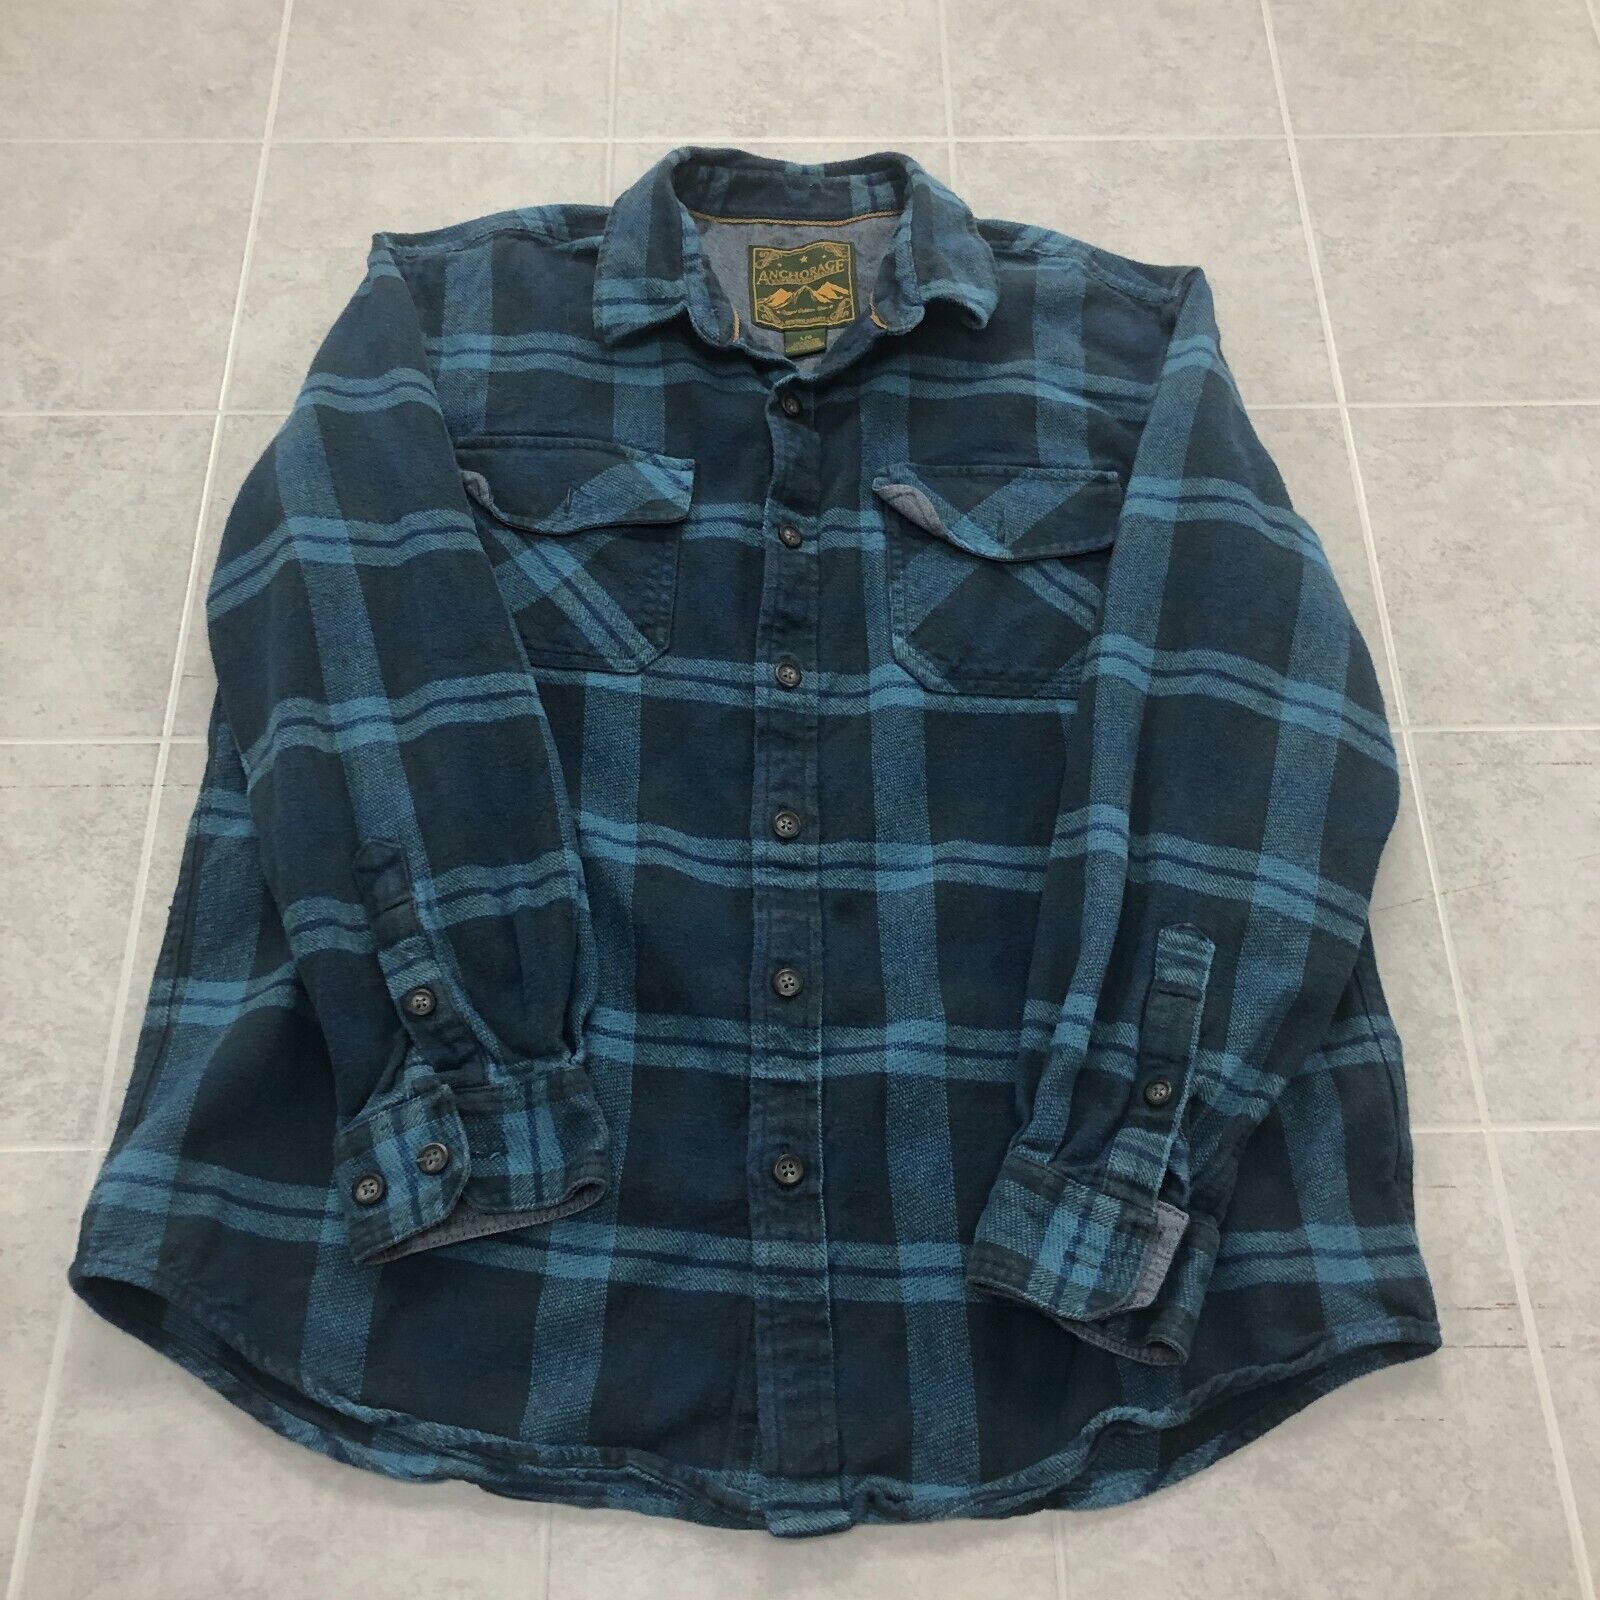 Anchorage Navy Blue Plaid Casual Long Sleeve Button Up Flannel Adult Size L